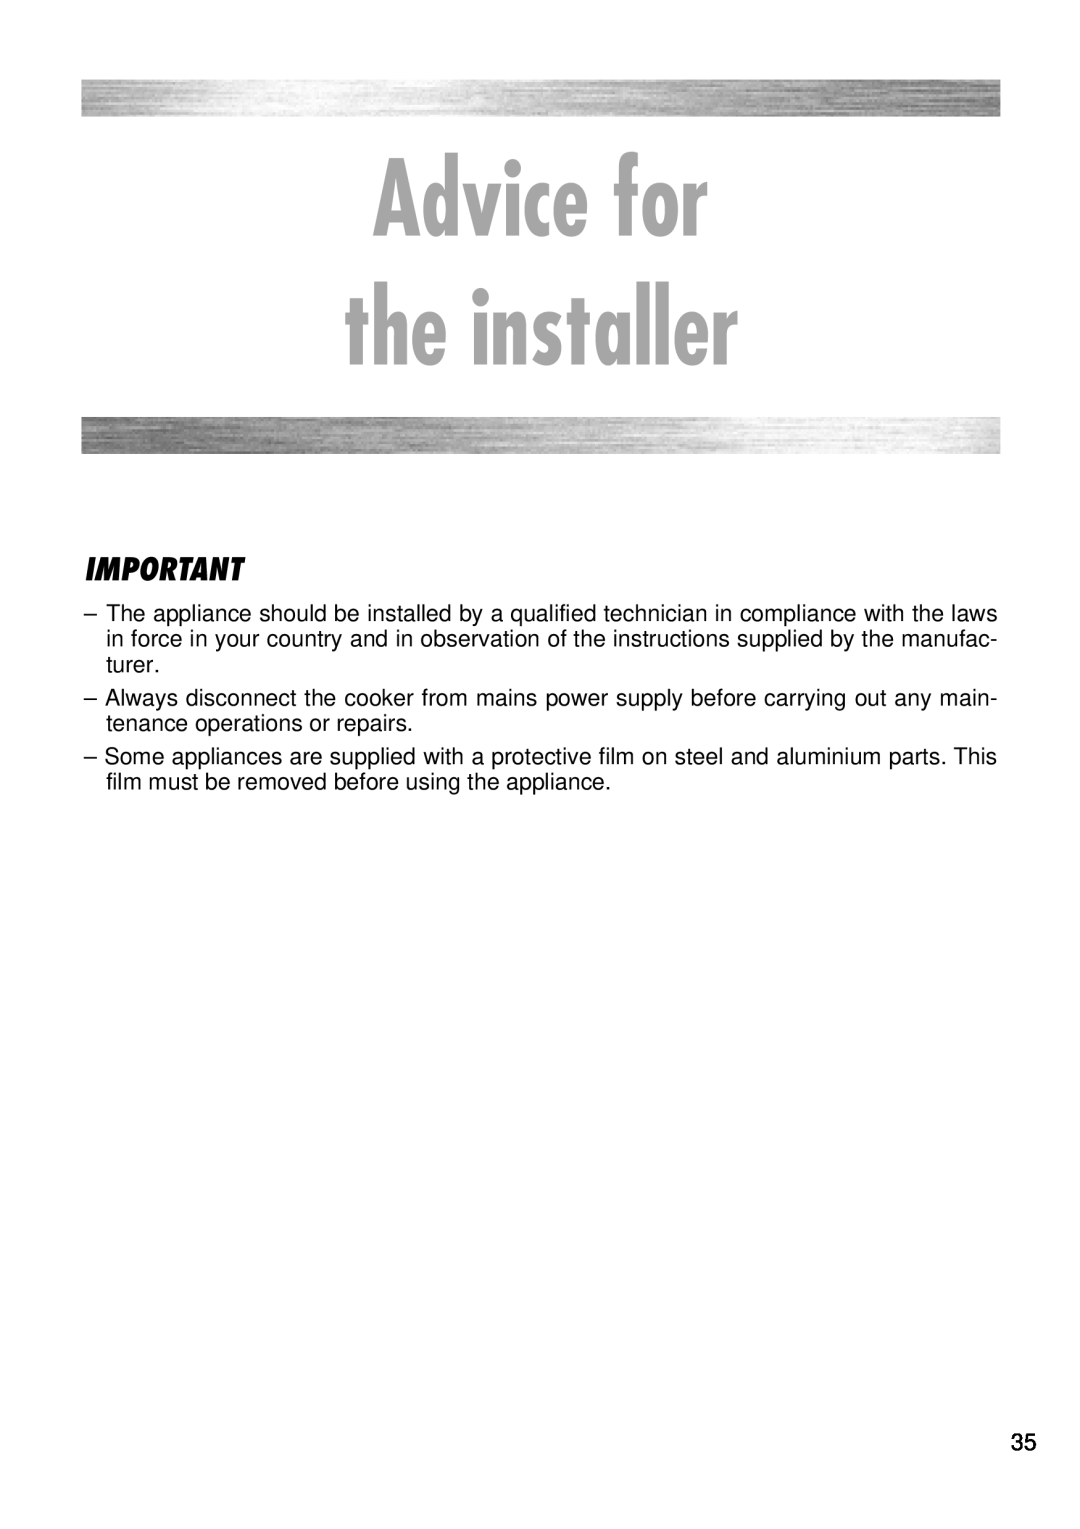 Kenwood CK 780 manual Advice for the installer 